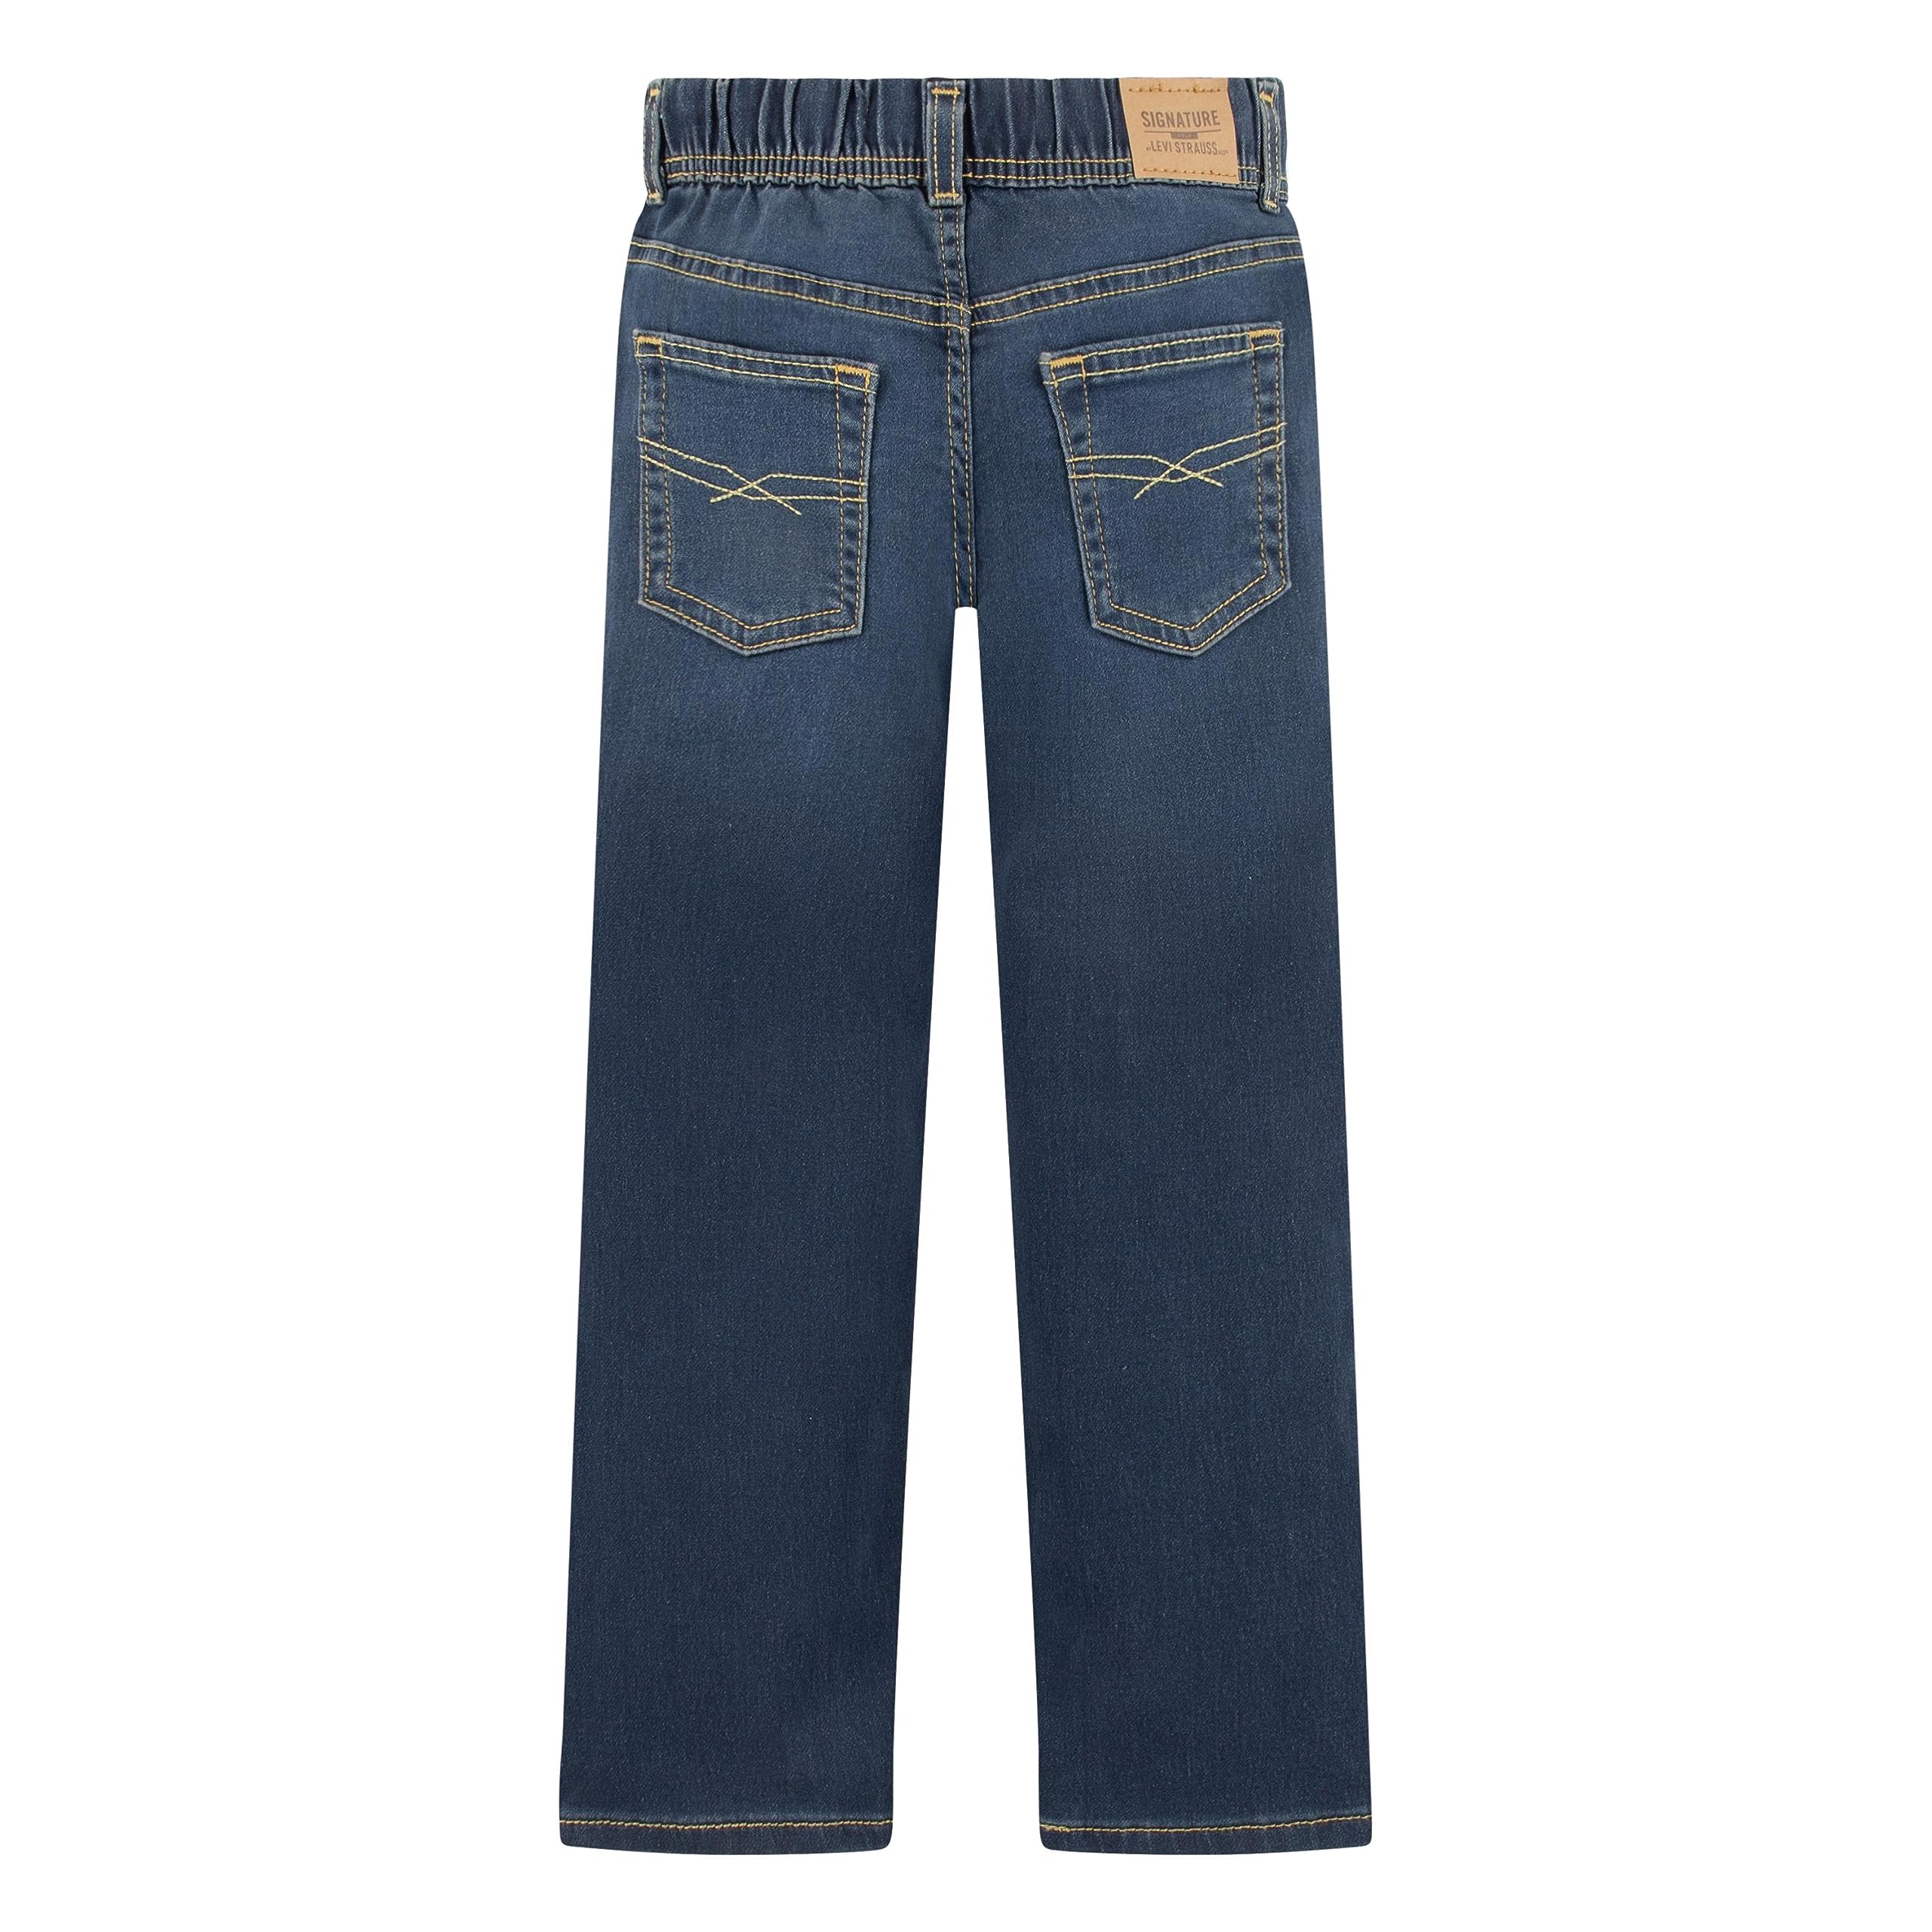 Signature by Levi Strauss & Co. Gold Label Boys' Pull on Jeans